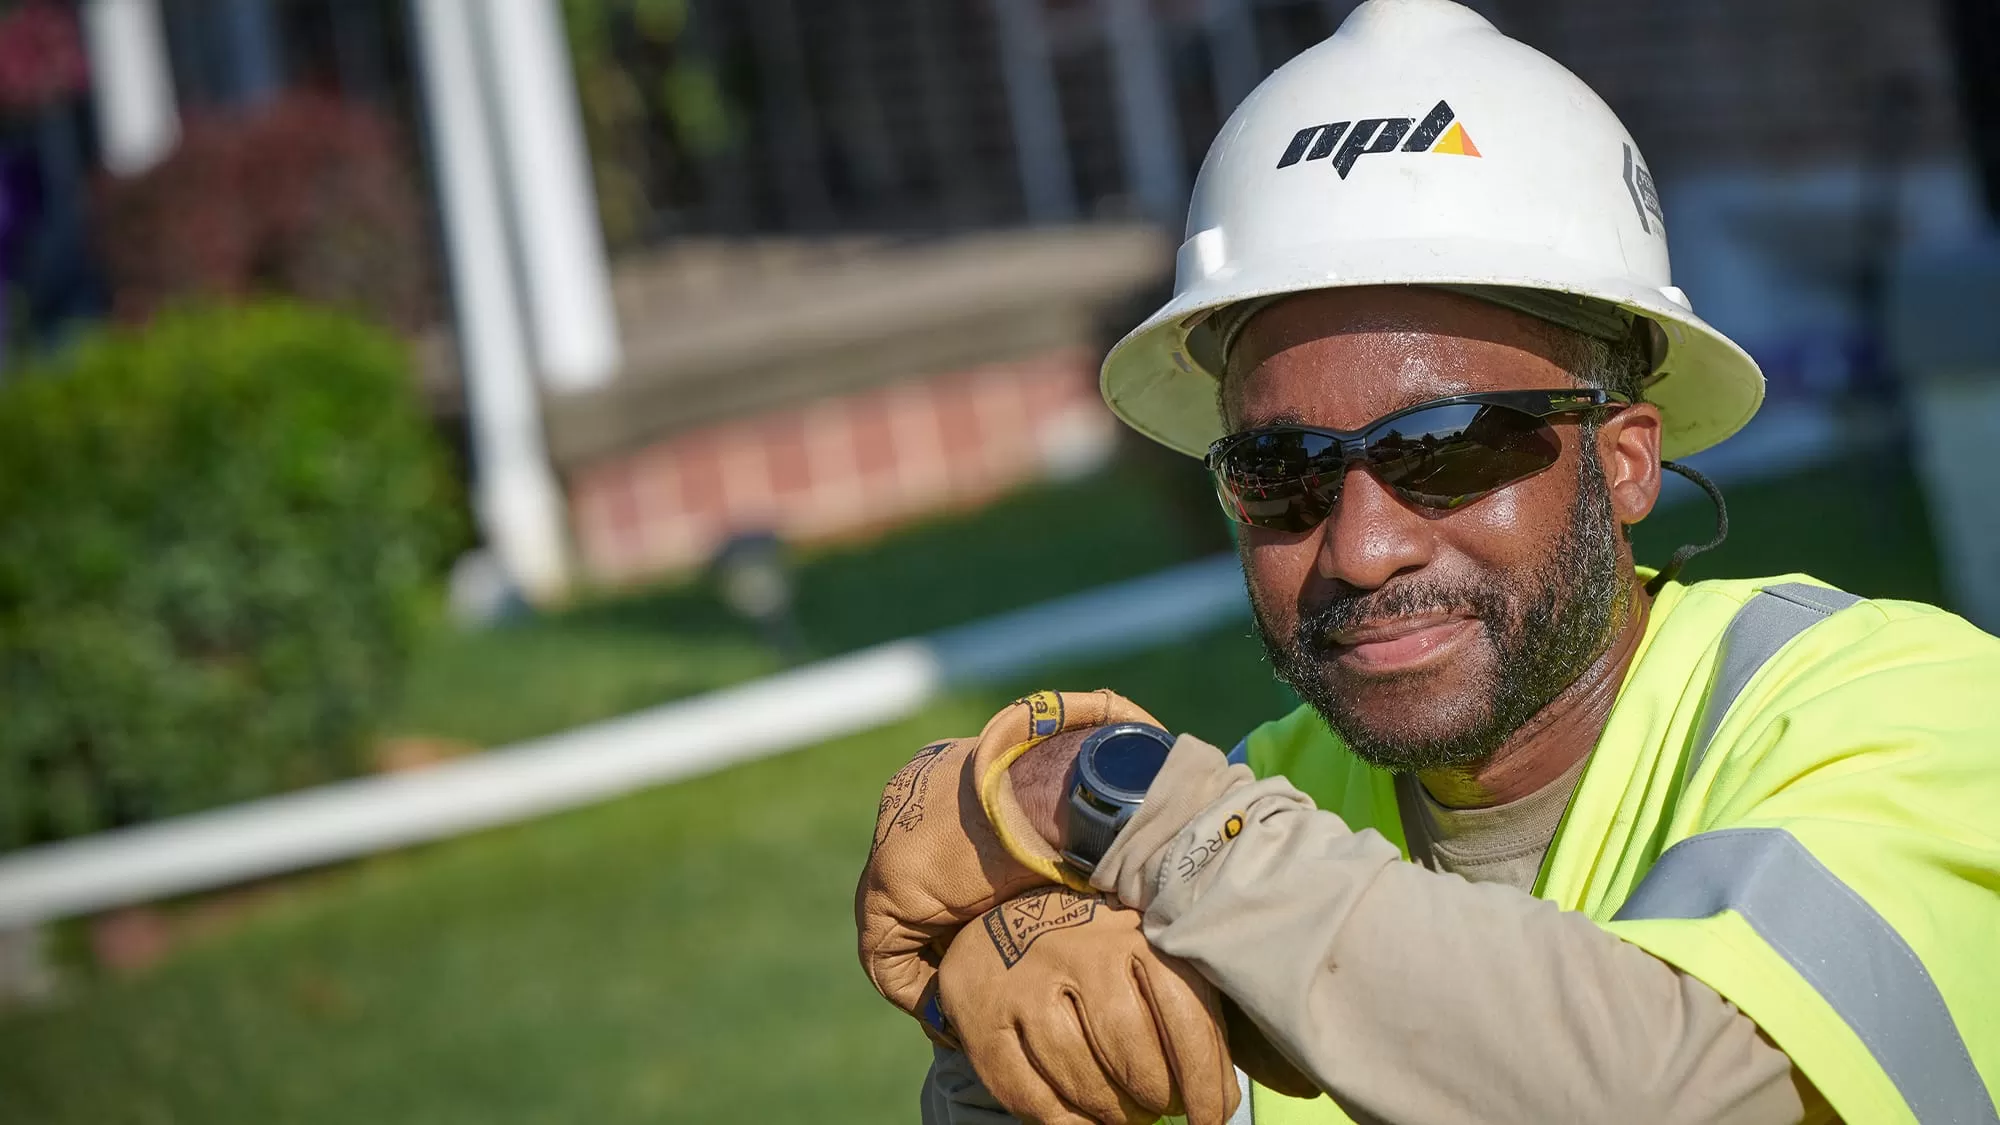 npl worker smiling at the camera